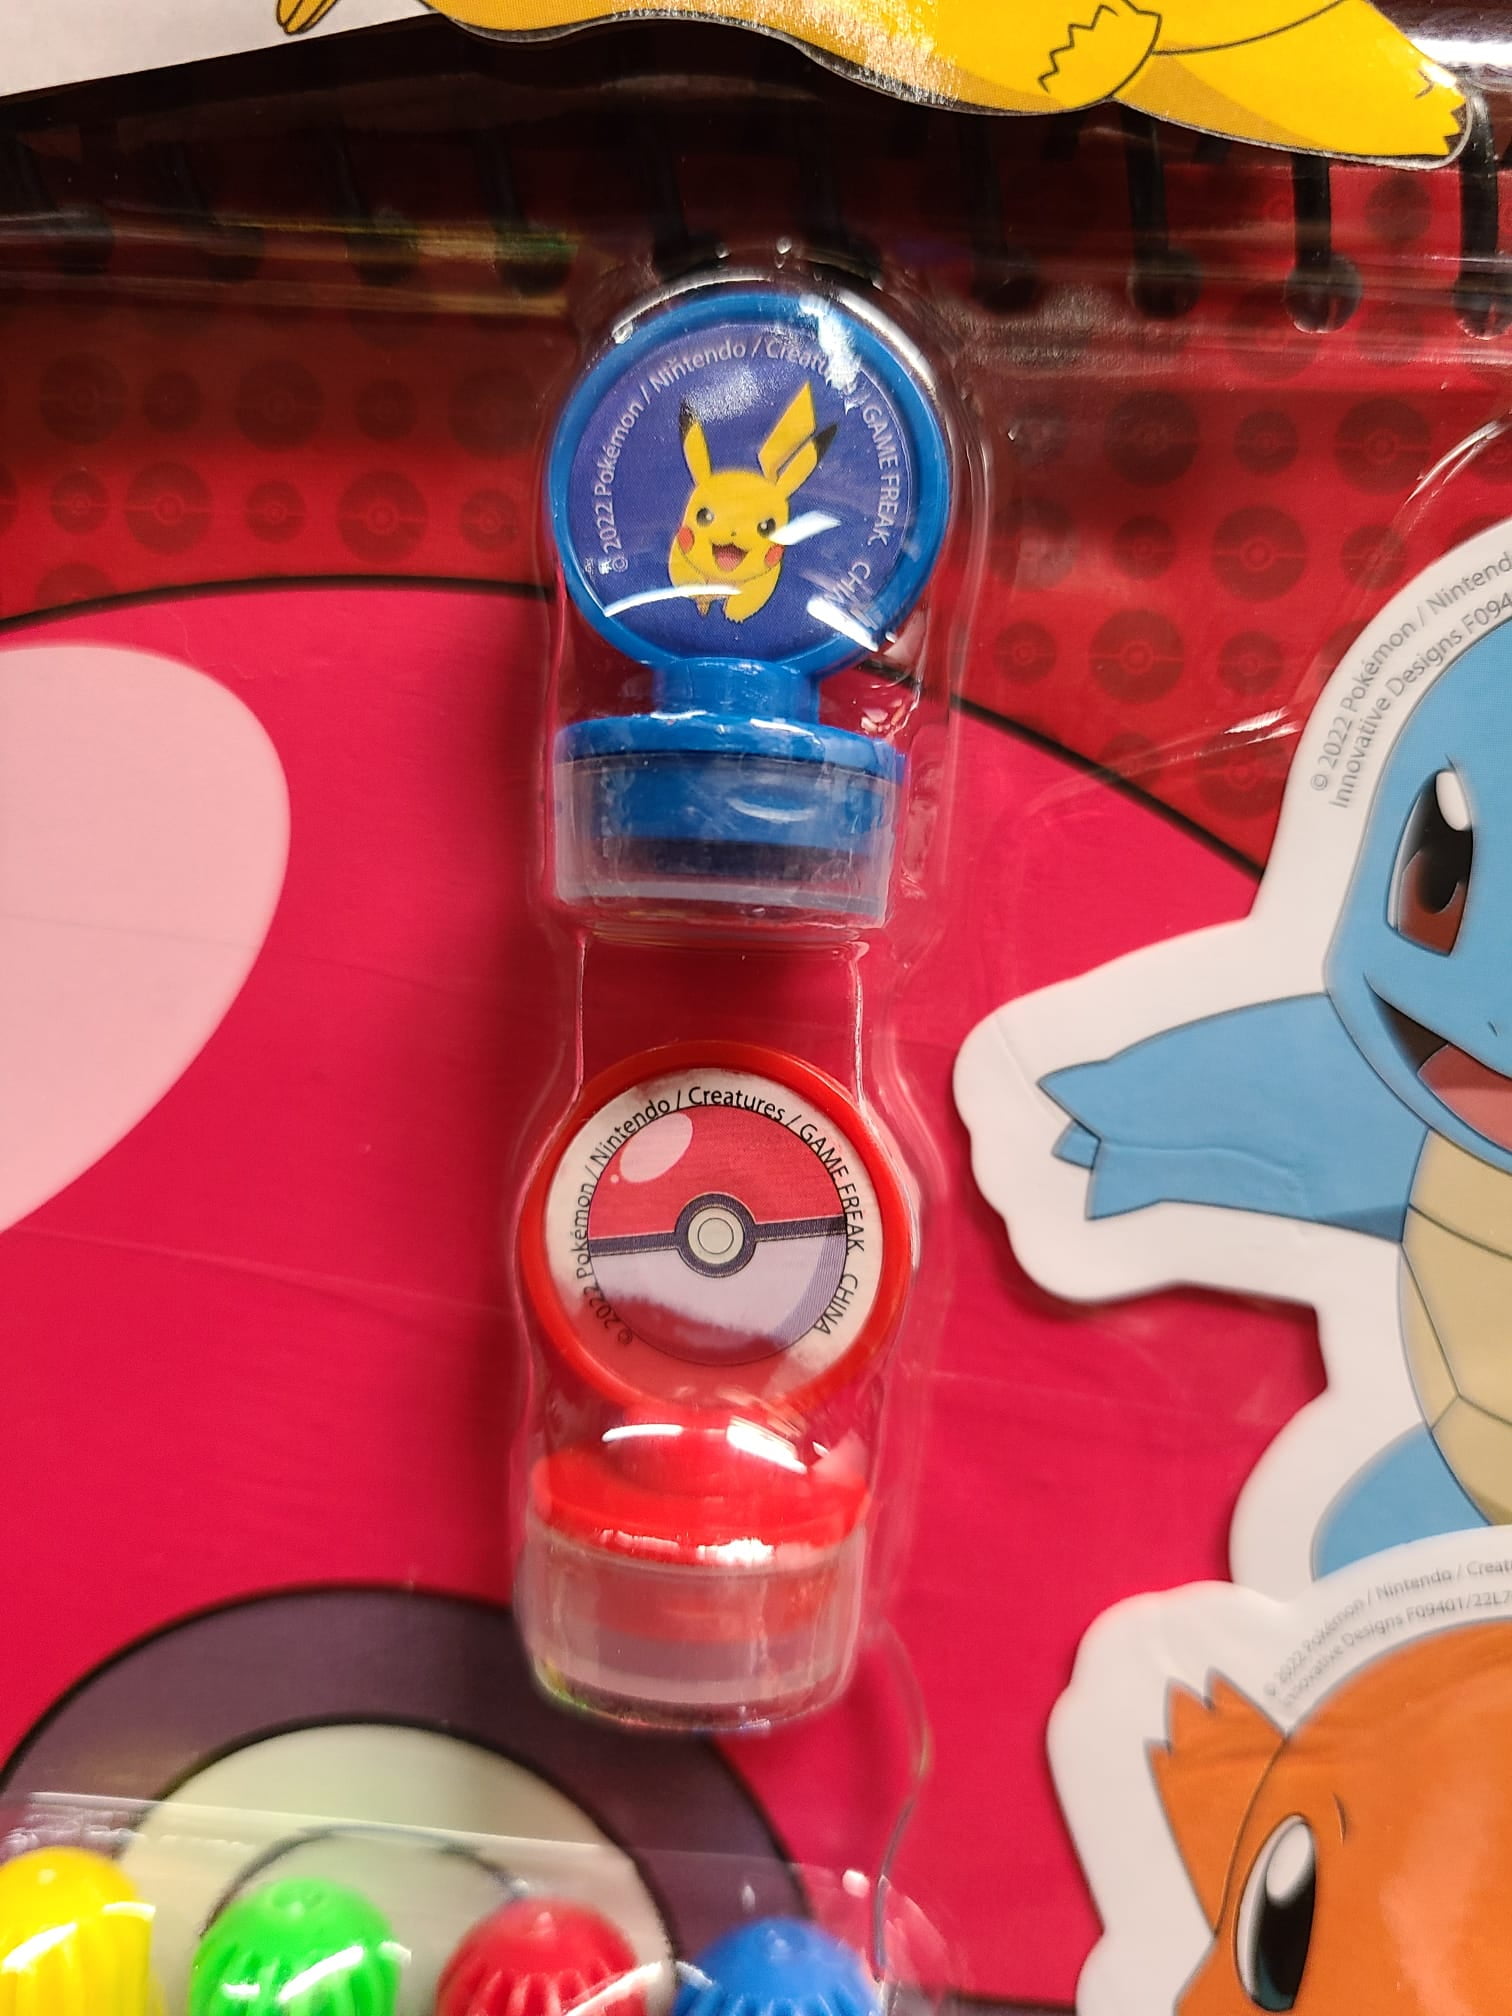 Pokemon Inspired Colored Pencil Gift Set - 'Gotta Catch Them All!' – Pop  Colors